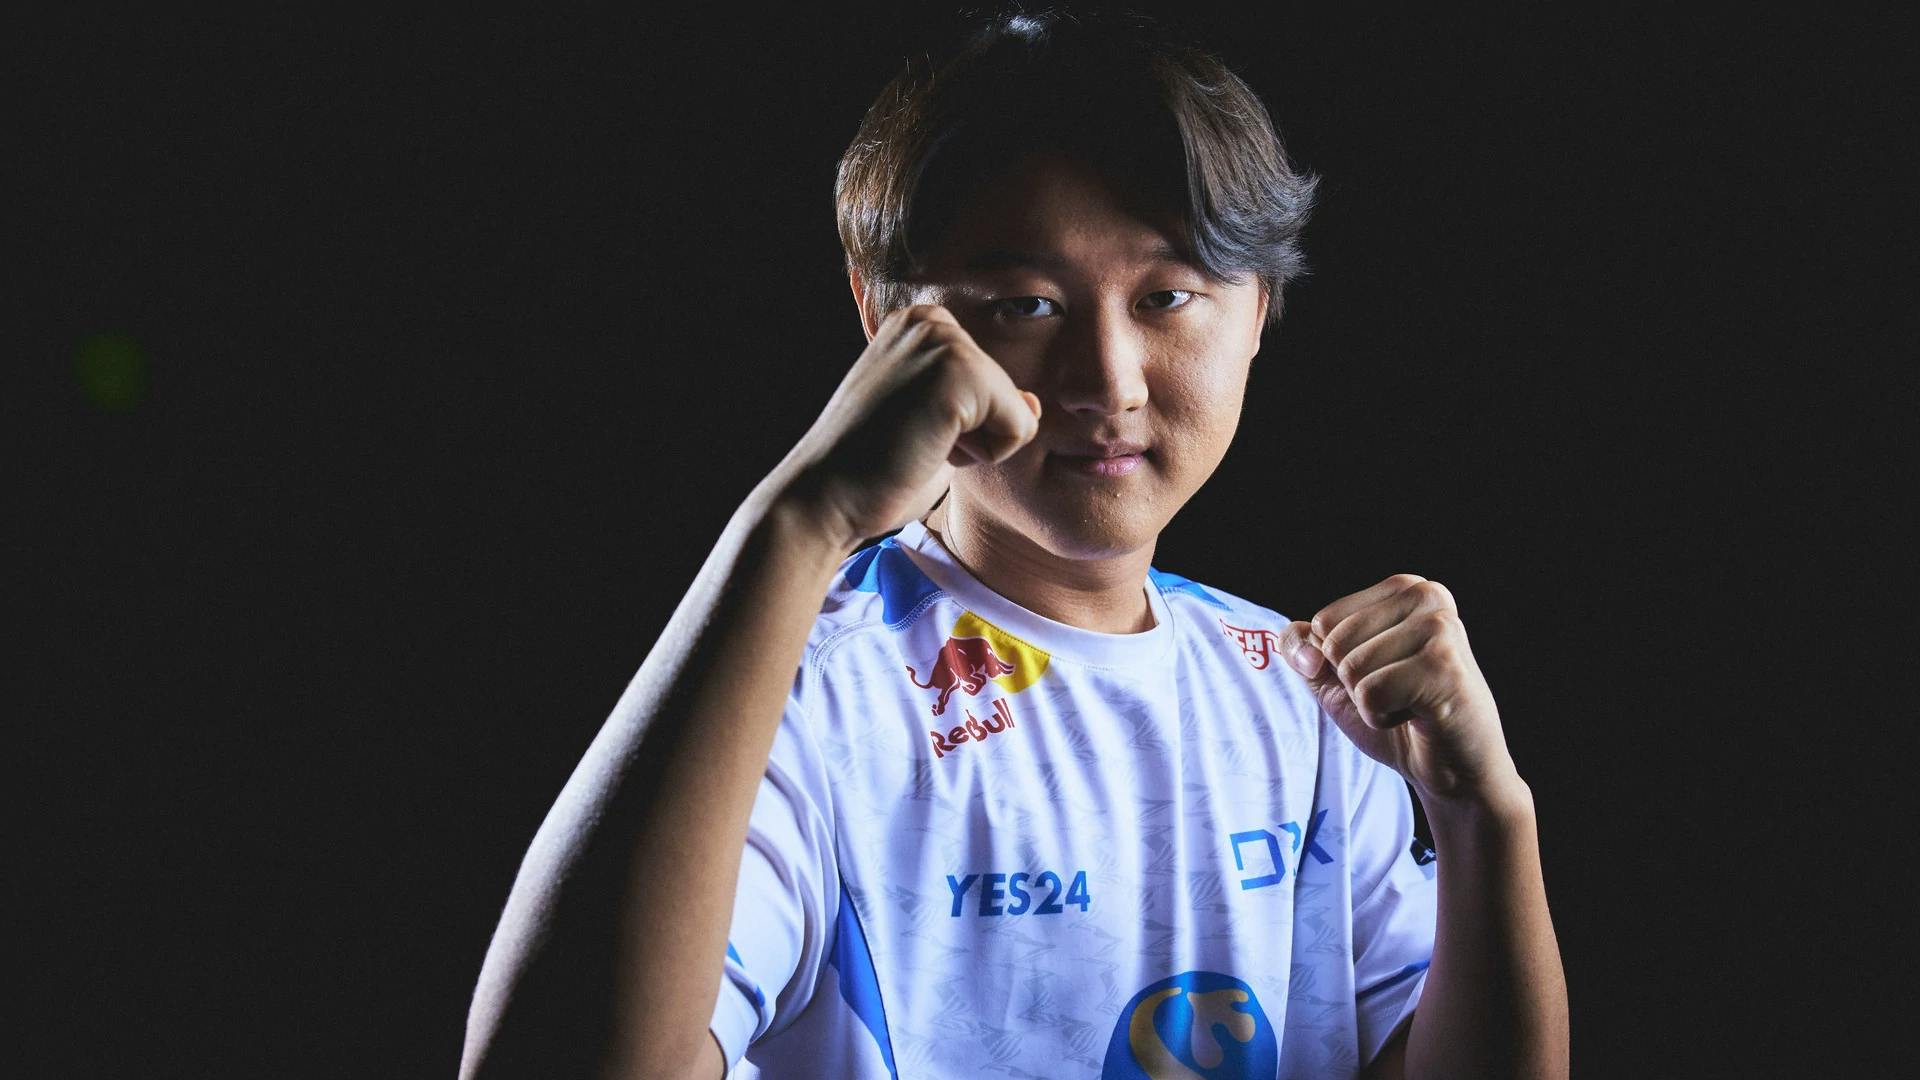 Team Liquid officially announces Spring 2023 roster and staff